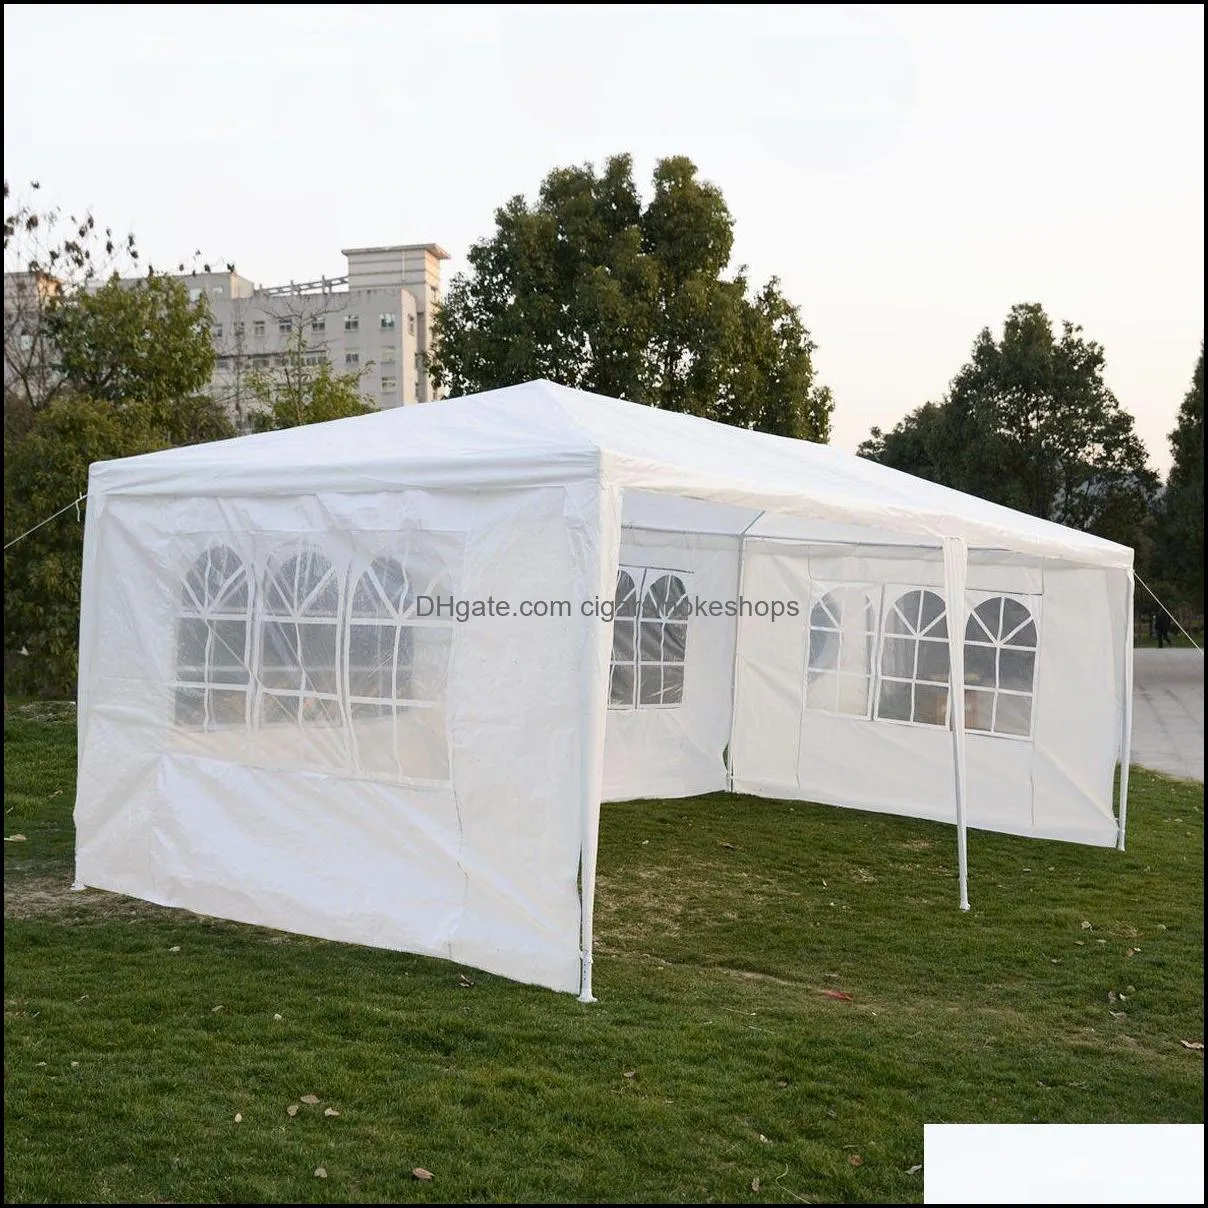 Outdoor 10`x20`Canopy Party Wedding Tent Gazebo Pavilion Cater Events 4 Sidewall